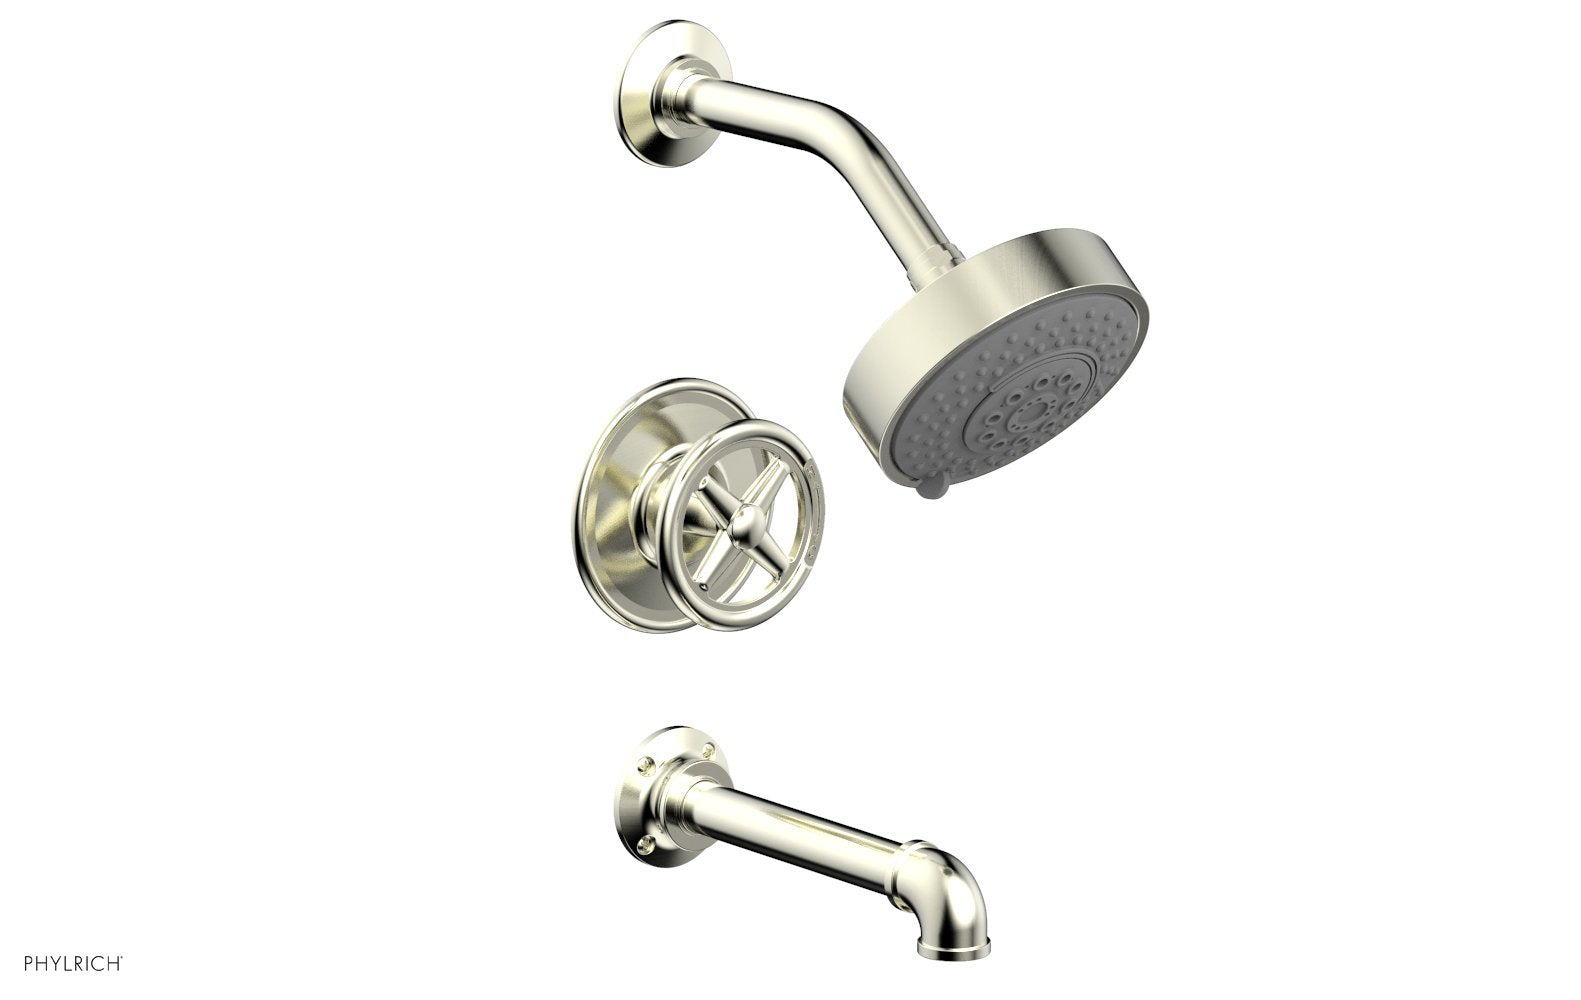 Phylrich WORKS 2 Pressure Balance Tub and Shower Set - Cross Handle